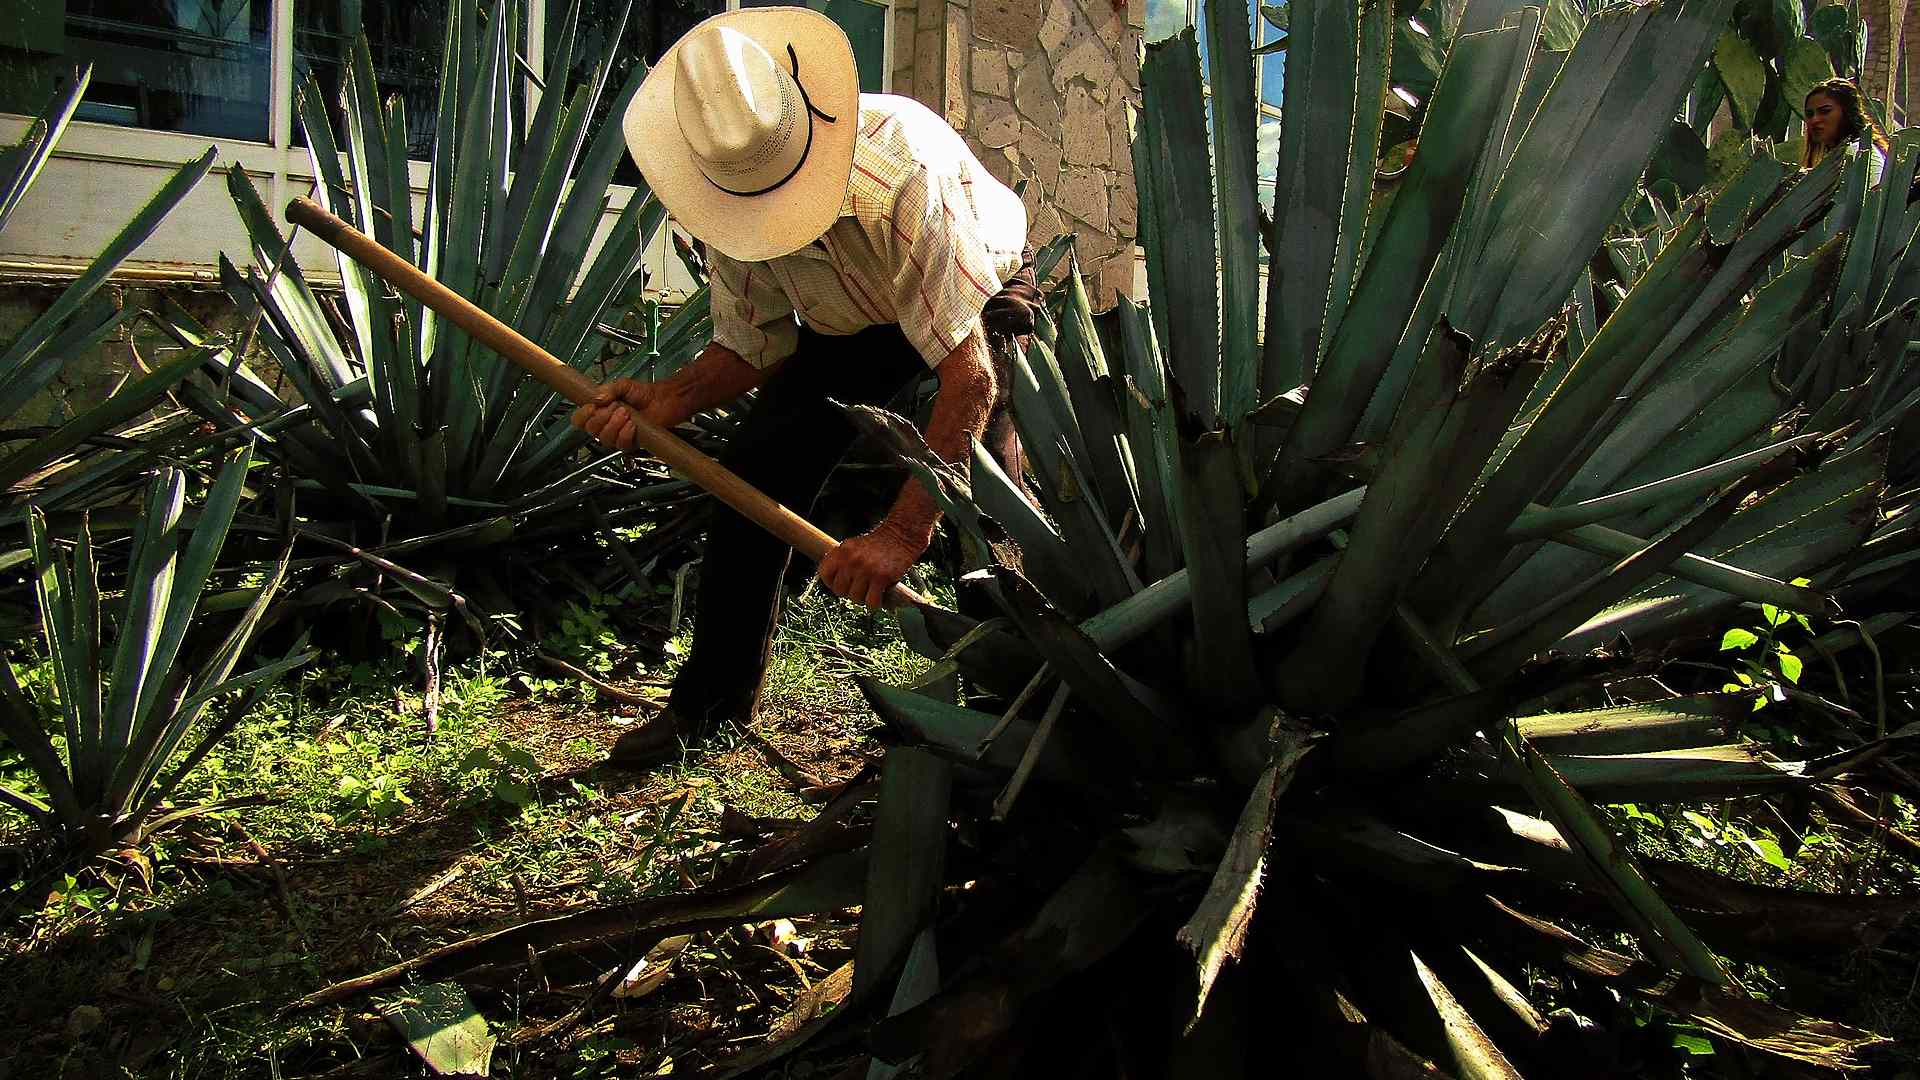 El Jimador and his work in the fields of blue agave